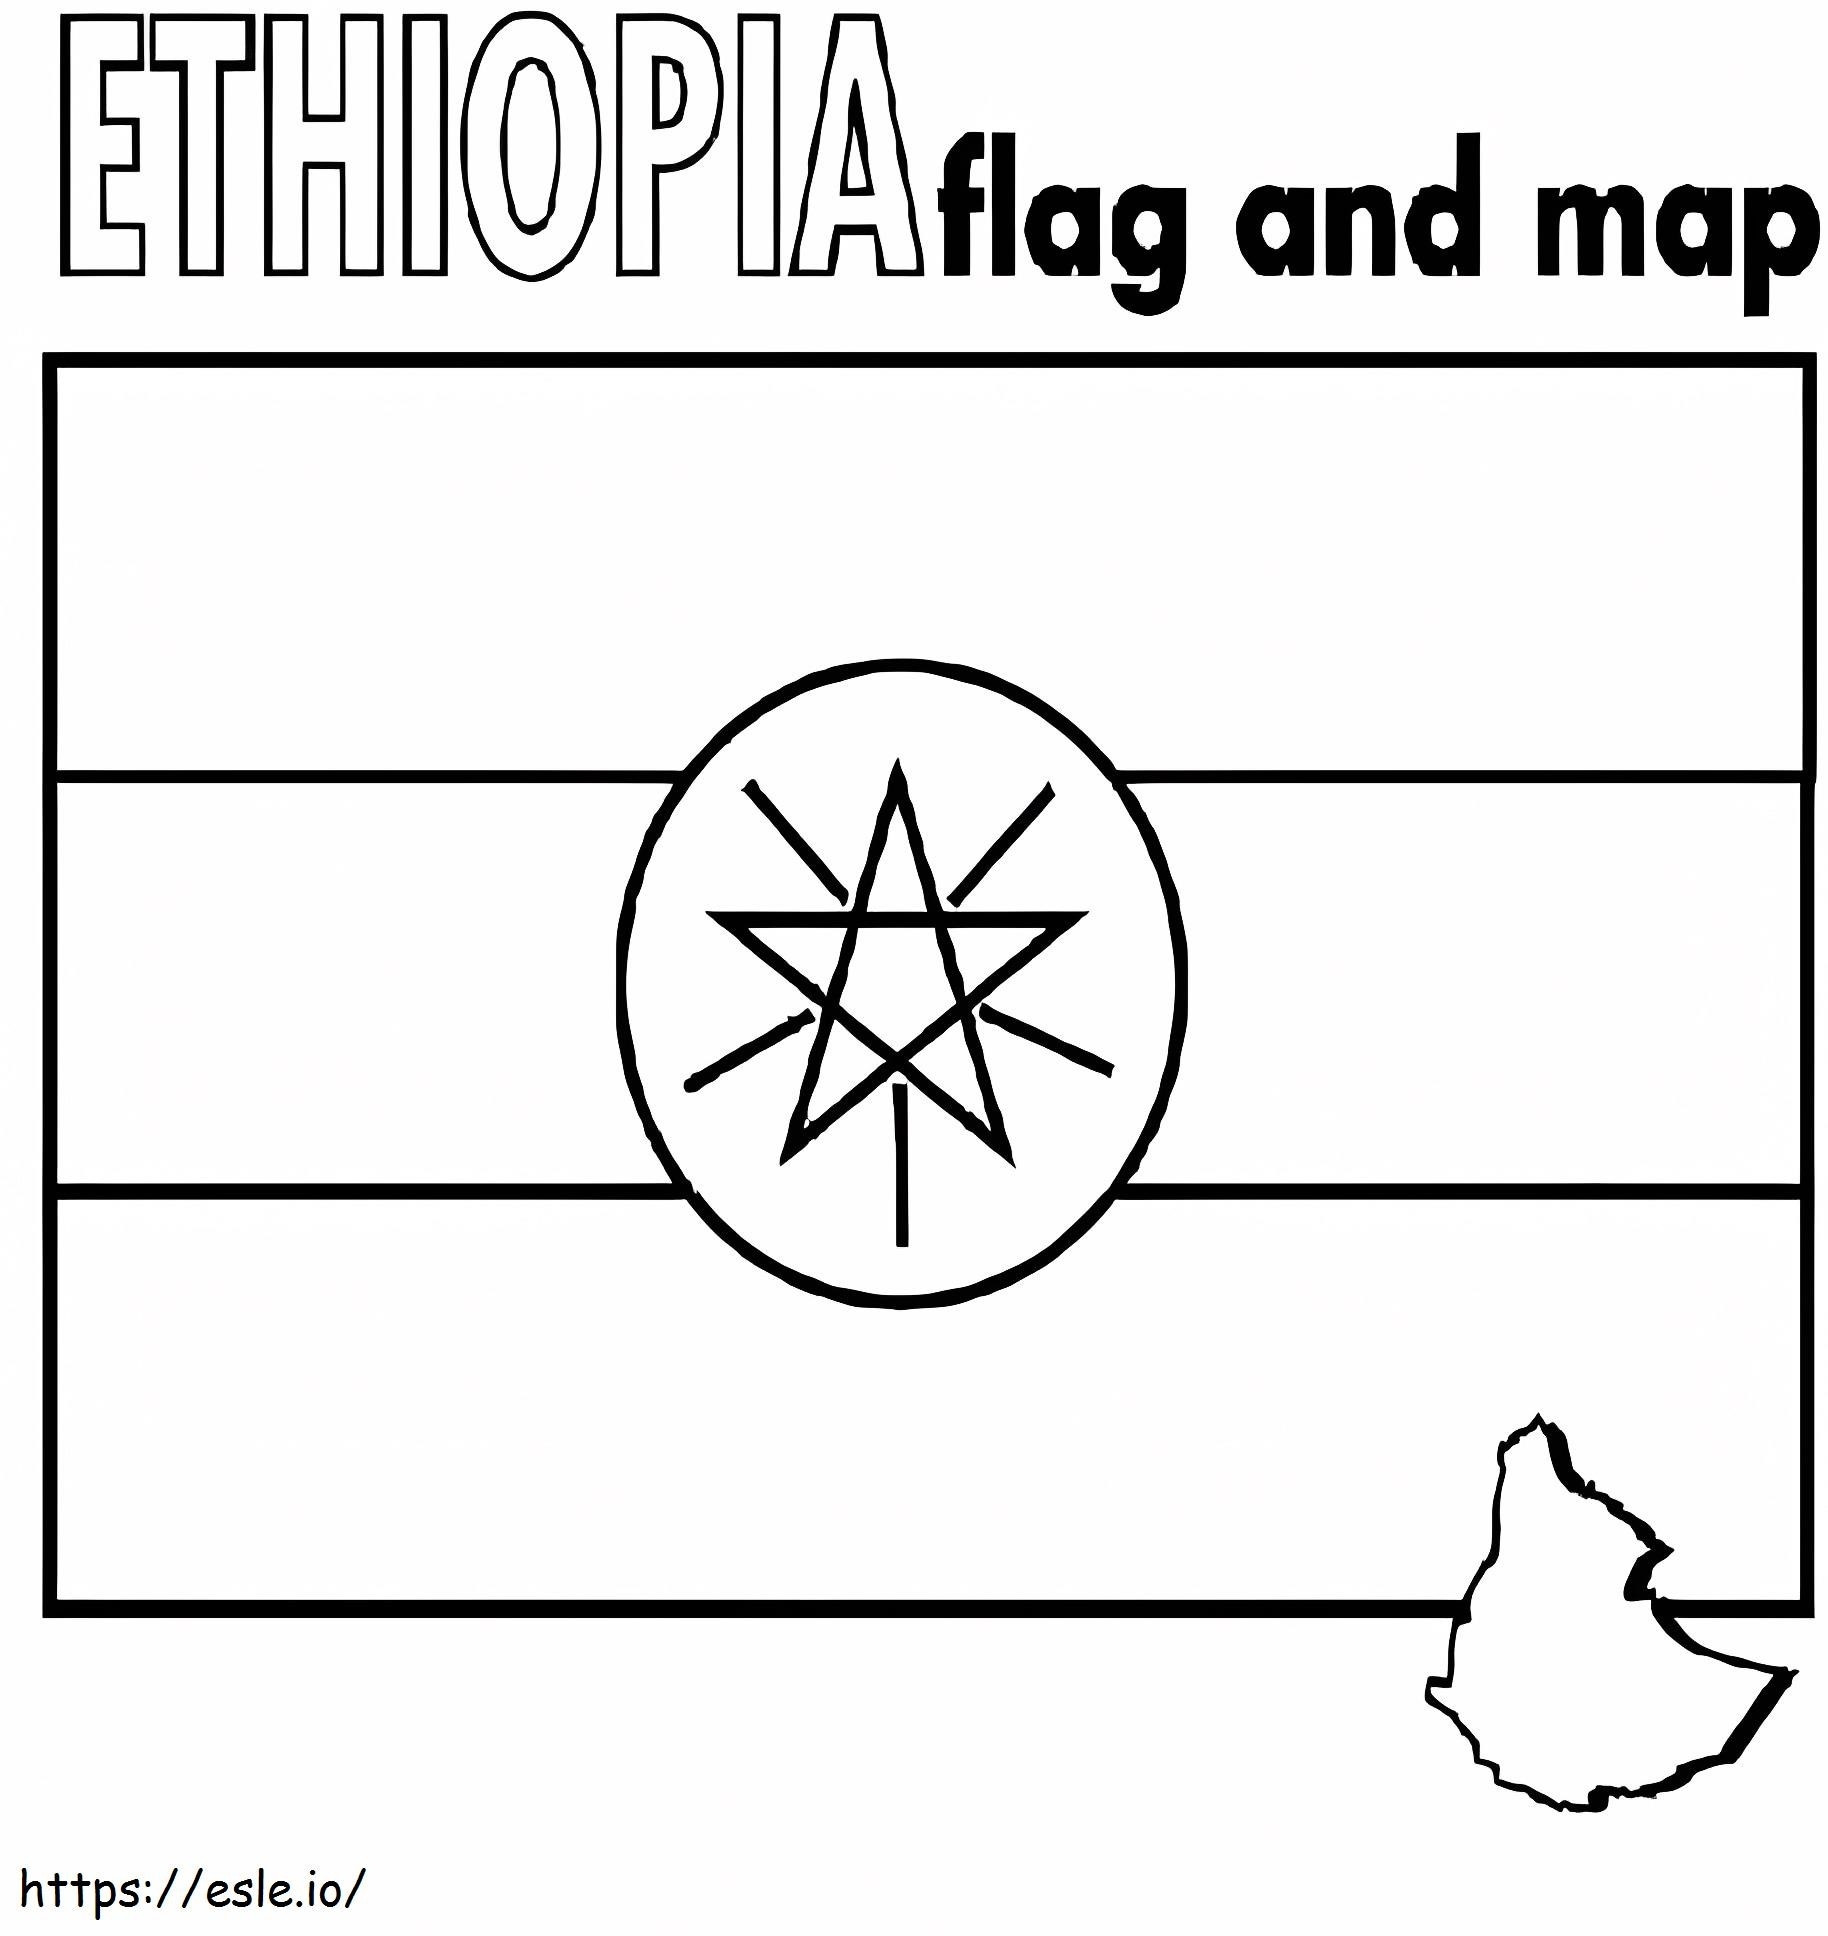 Ethpia flag and map coloring page